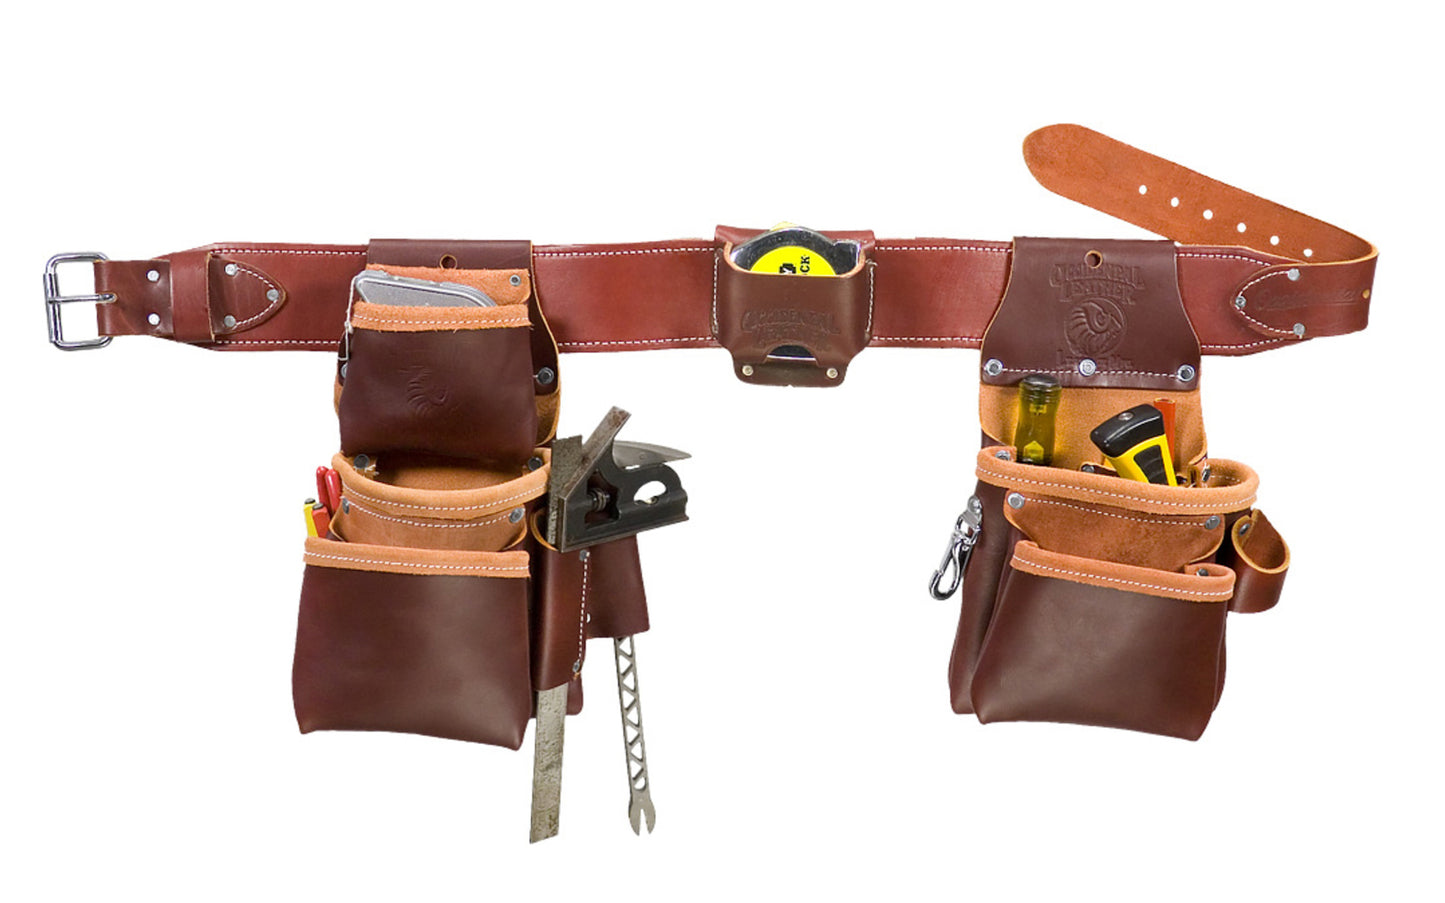 Occidental Leather "Pro Trimmer" Tool Belt Set Package ~ 6100T M - Medium Belt Size (3" Medium Ranger Work Belt) - Premium Top-Grain Leather - 18 Pockets & Tool Holders - 759244032109. Pro Leather series is made of top grain cow hides tanned with oils & waxes for heavy use. Tool & fastener organization for efficiency